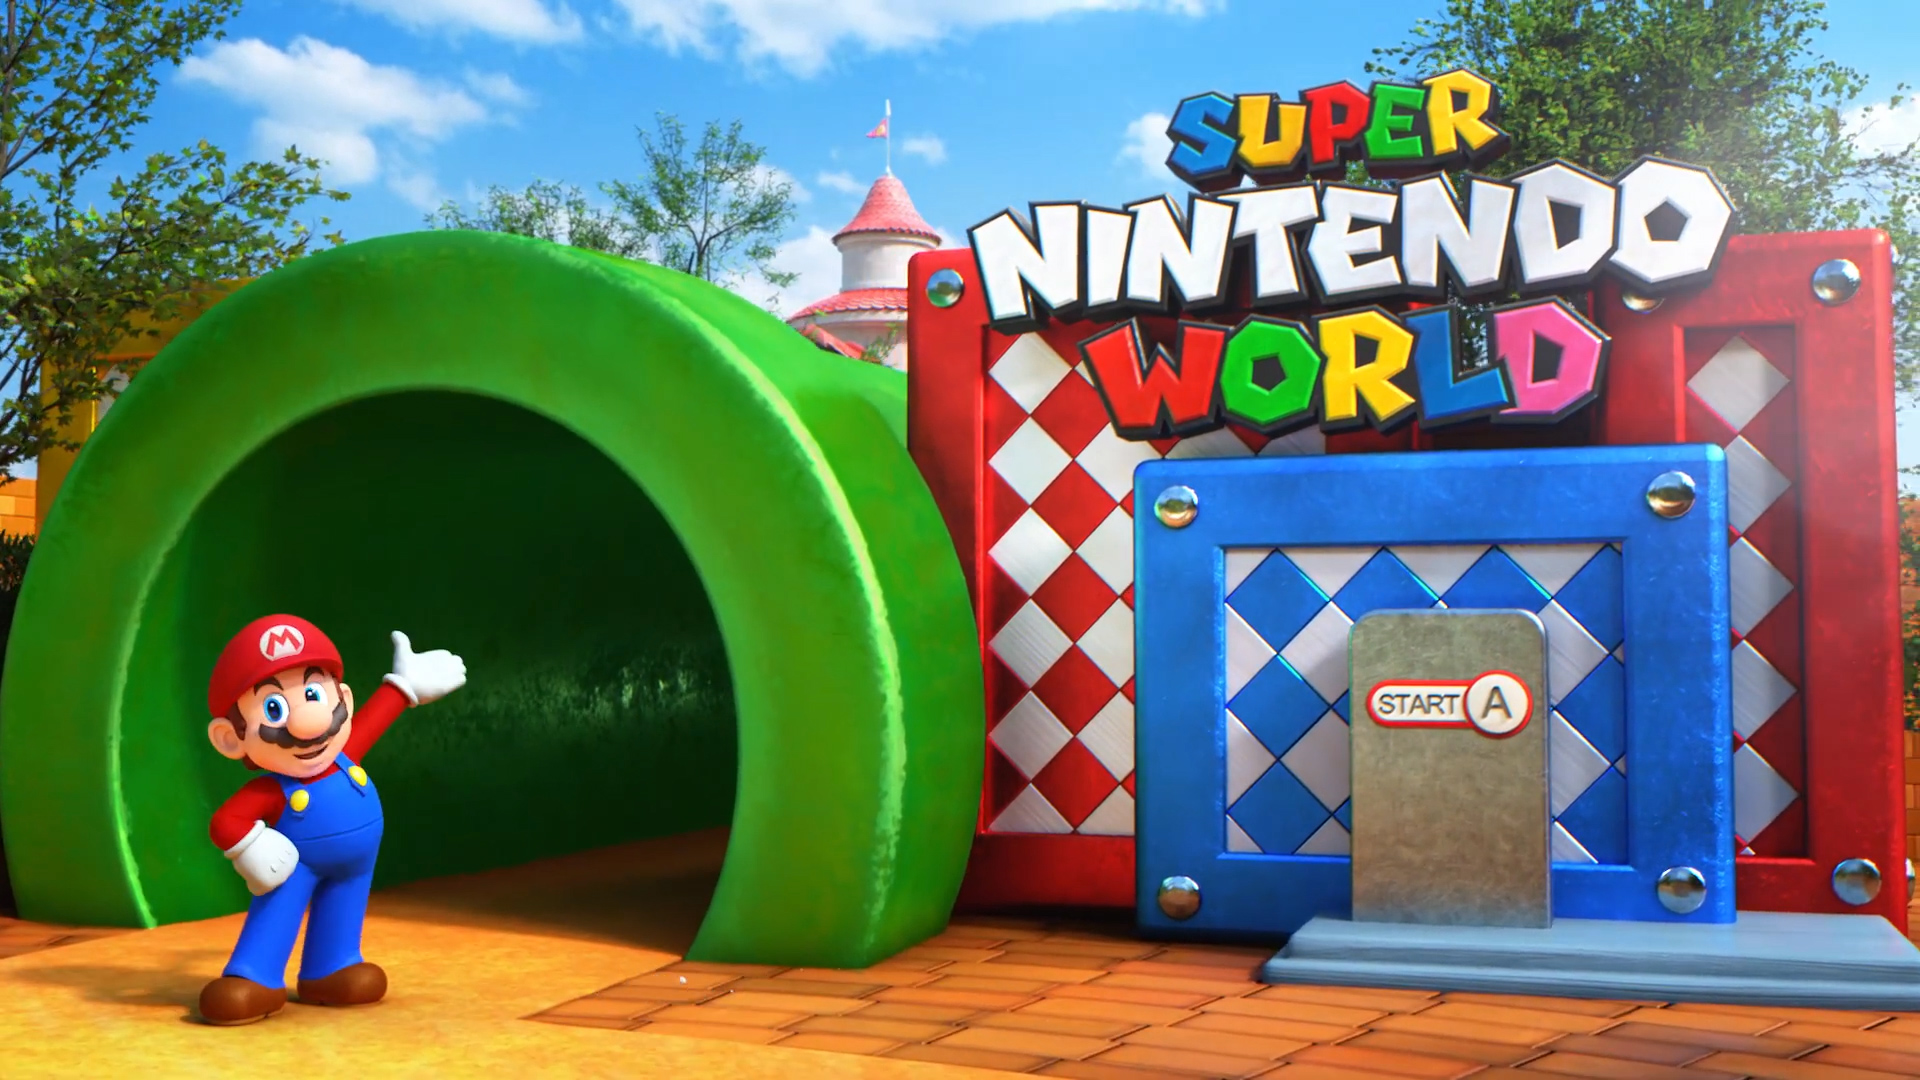 Super Nintendo World has once again been forced to postpone the opening due to Covid-19